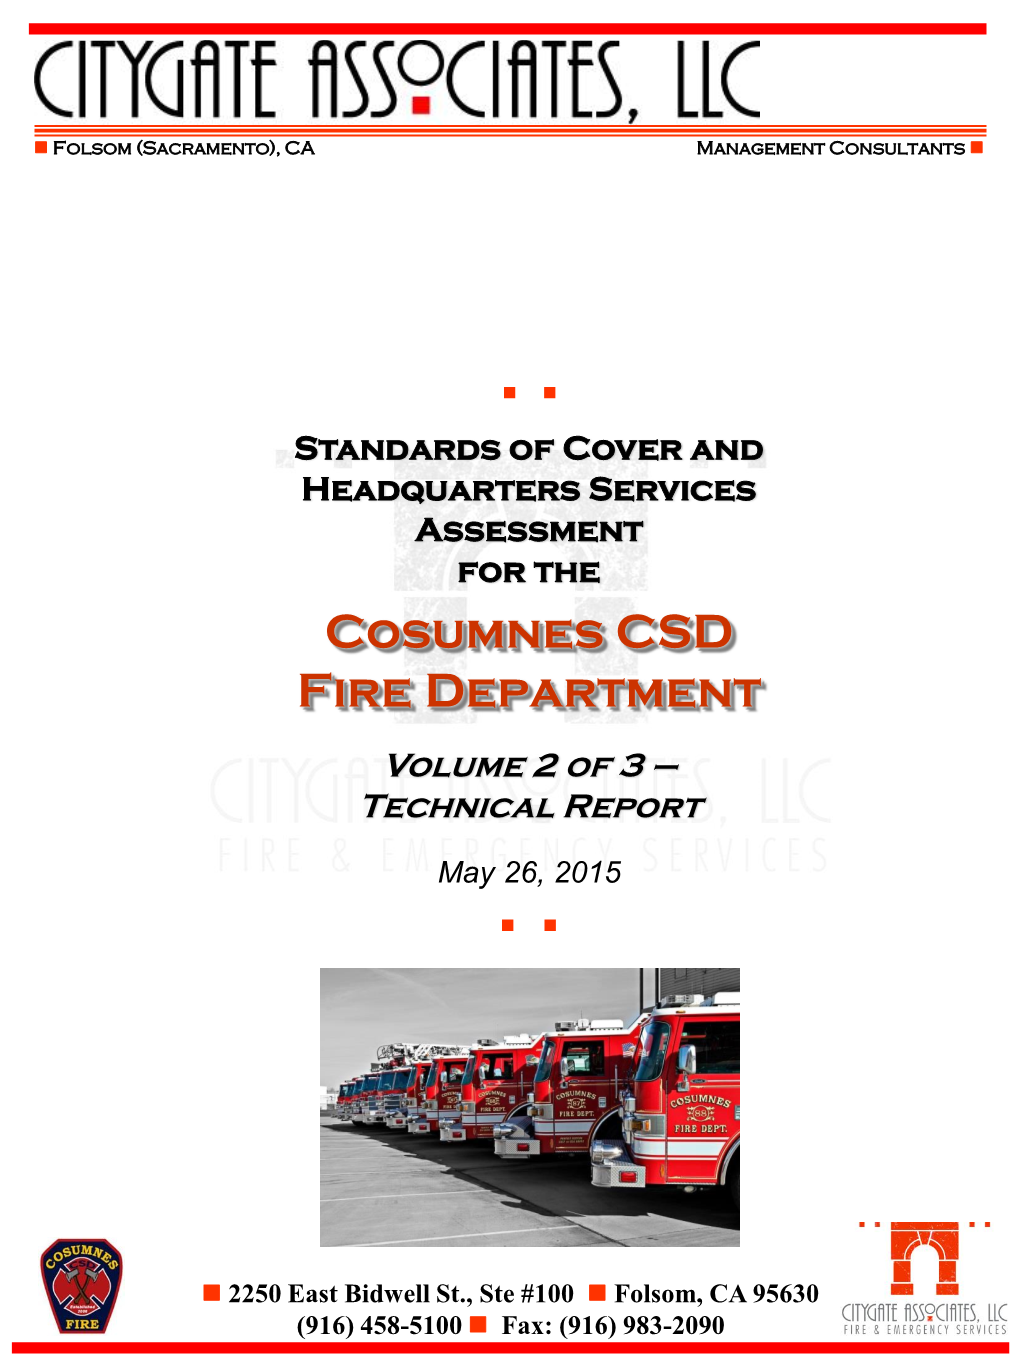 Cosumnes CSD Fire Department—Standards of Cover and Headquarters Services Assessment Volume 2—Technical Report